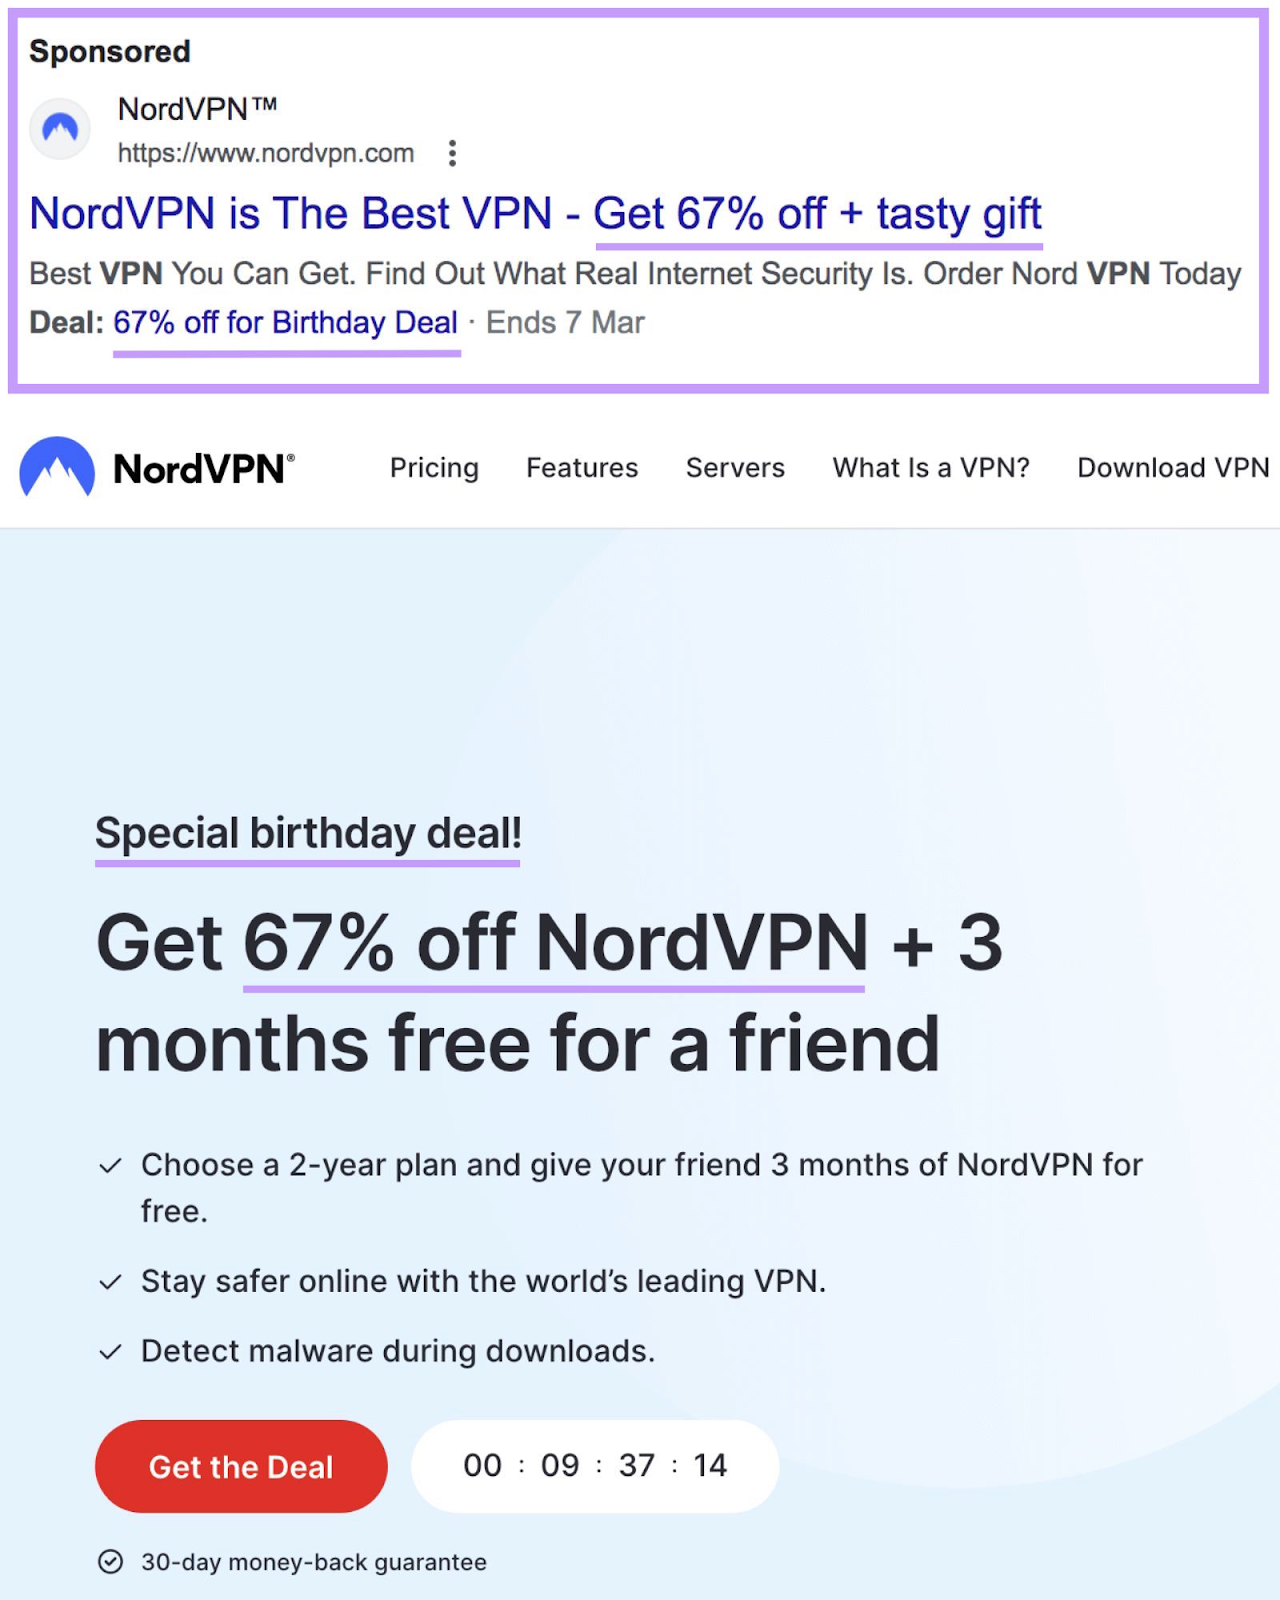 NordVPN's PPC ad and a landing page associated with the ad